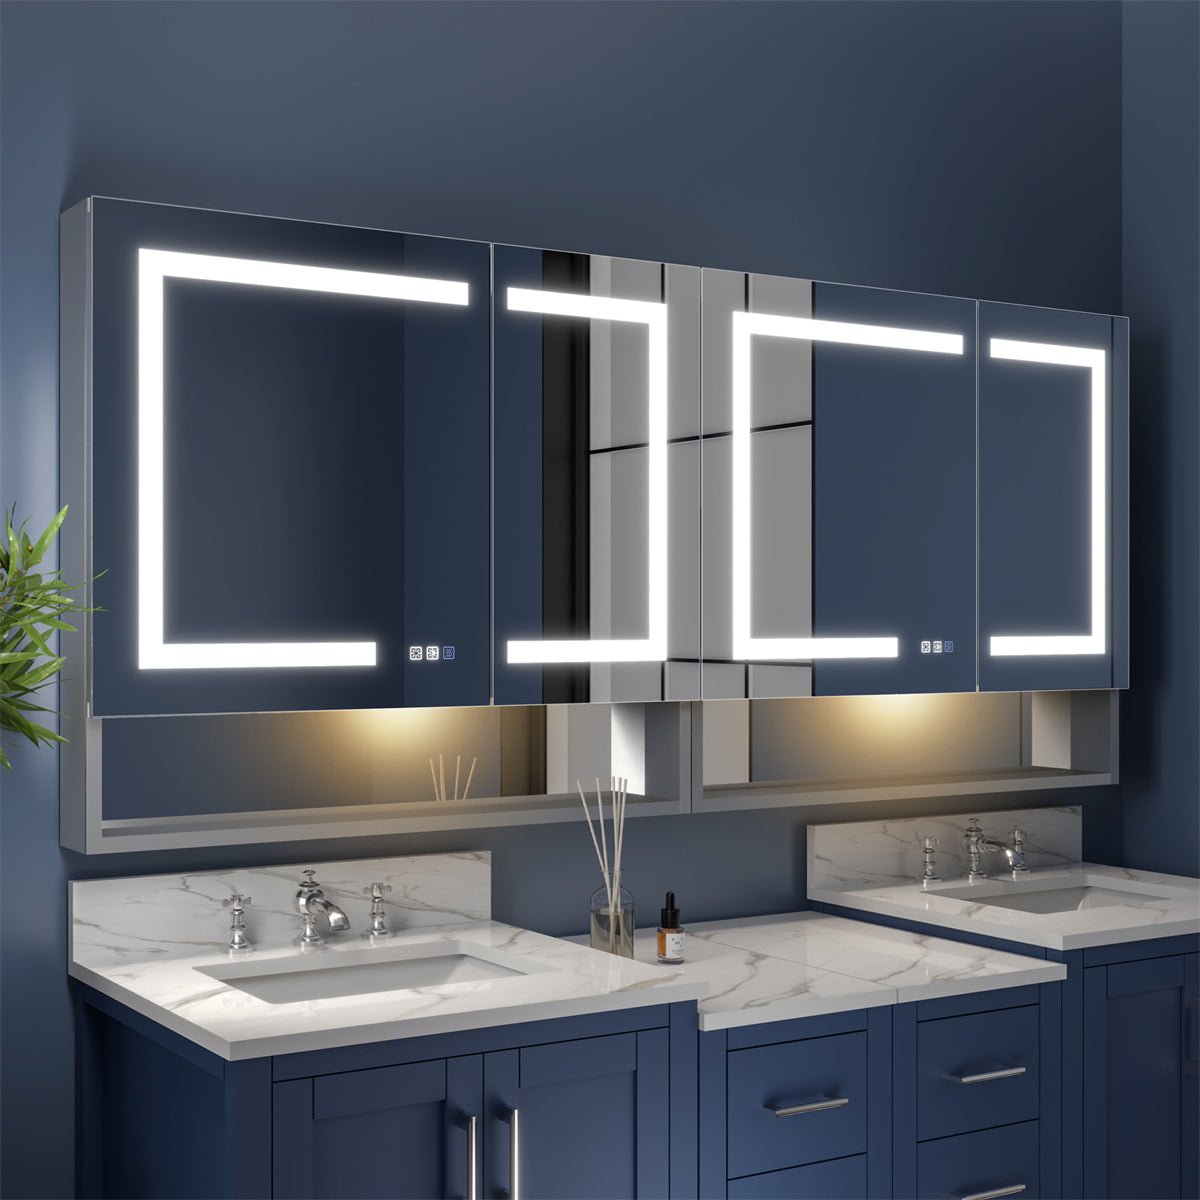 Ample 72" W x 32" H LED Lighted Mirror Chrome Medicine Cabinet with Shelves for Bathroom Recessed or Surface Mount